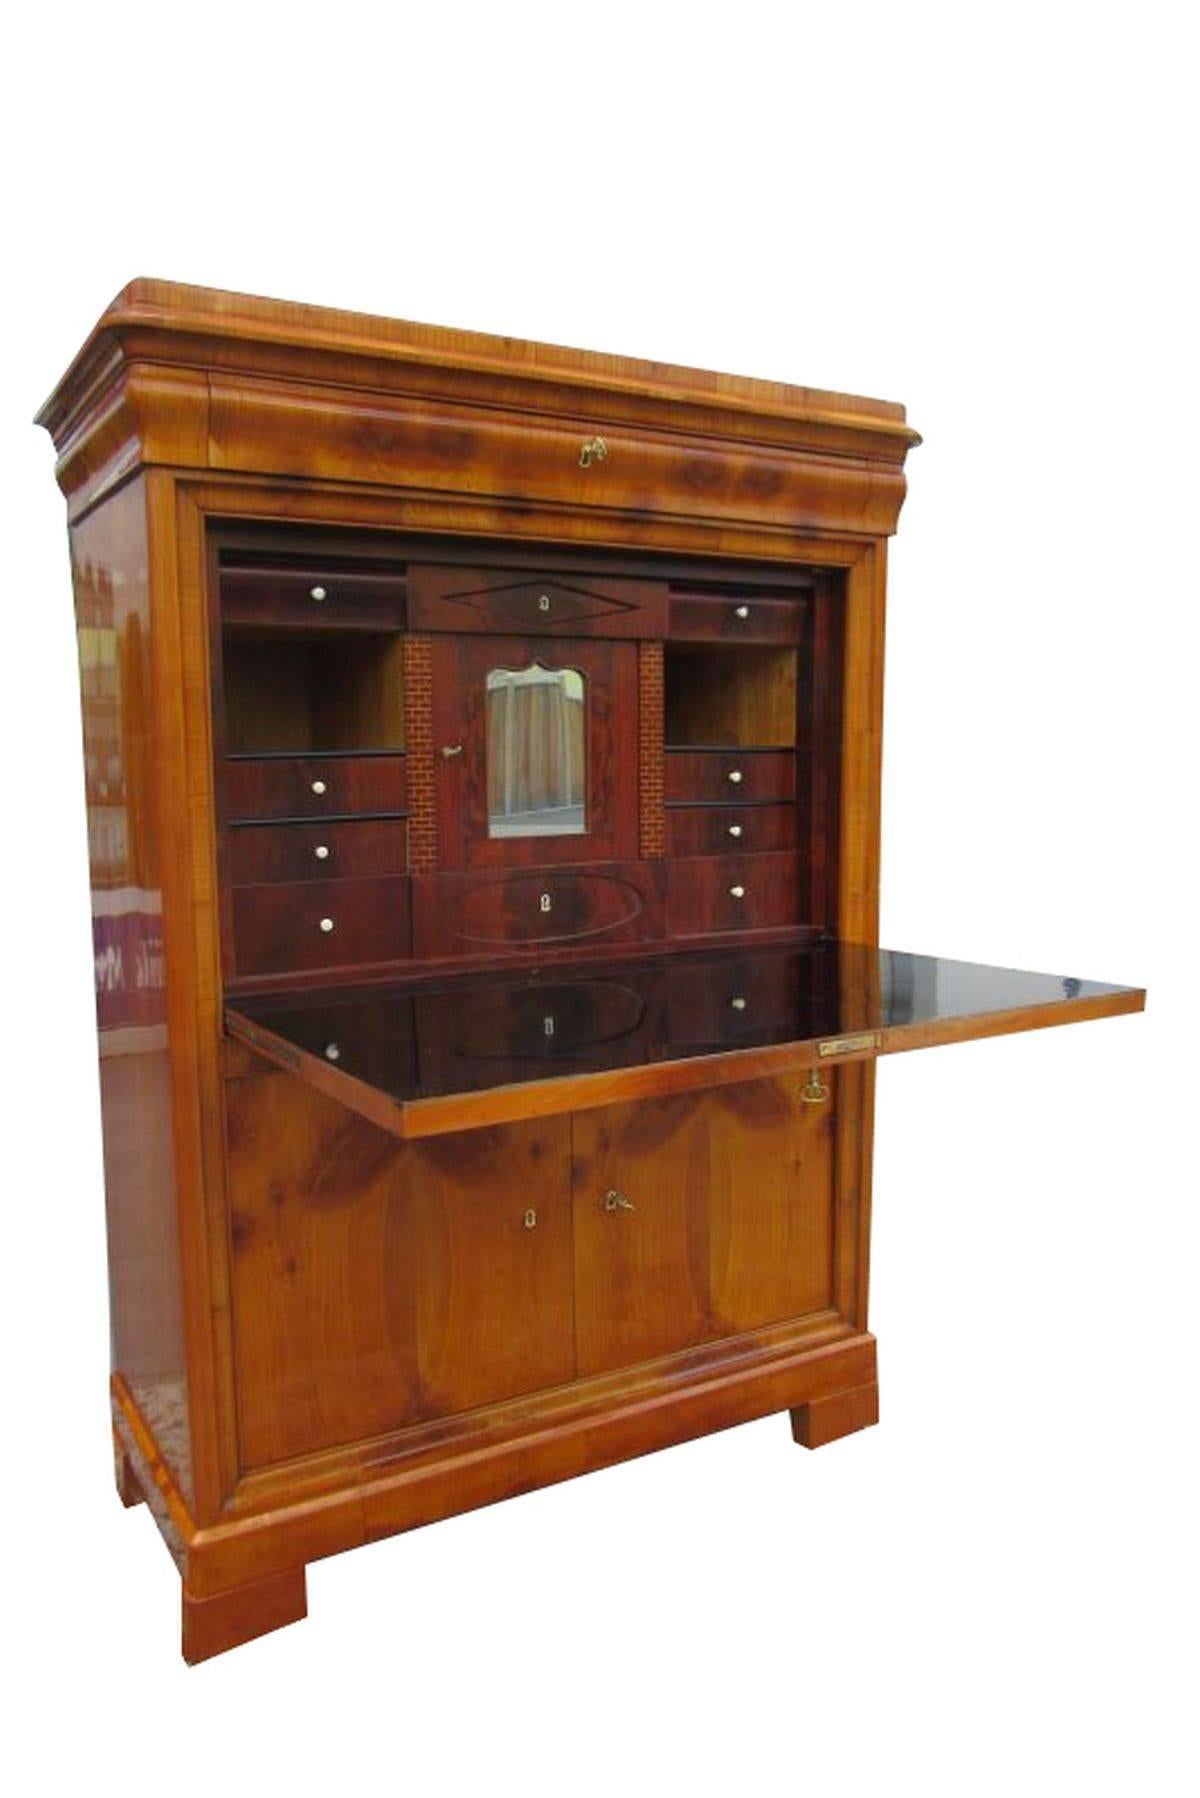 A Biedermeier Secretaire made of cherrywood. The corpus is made of softwood veneered with cherrywood. It has five compartments and a cabinet. Opening the cabinet reveals eight more drawers, two free compartments and a small door with a mirror. The